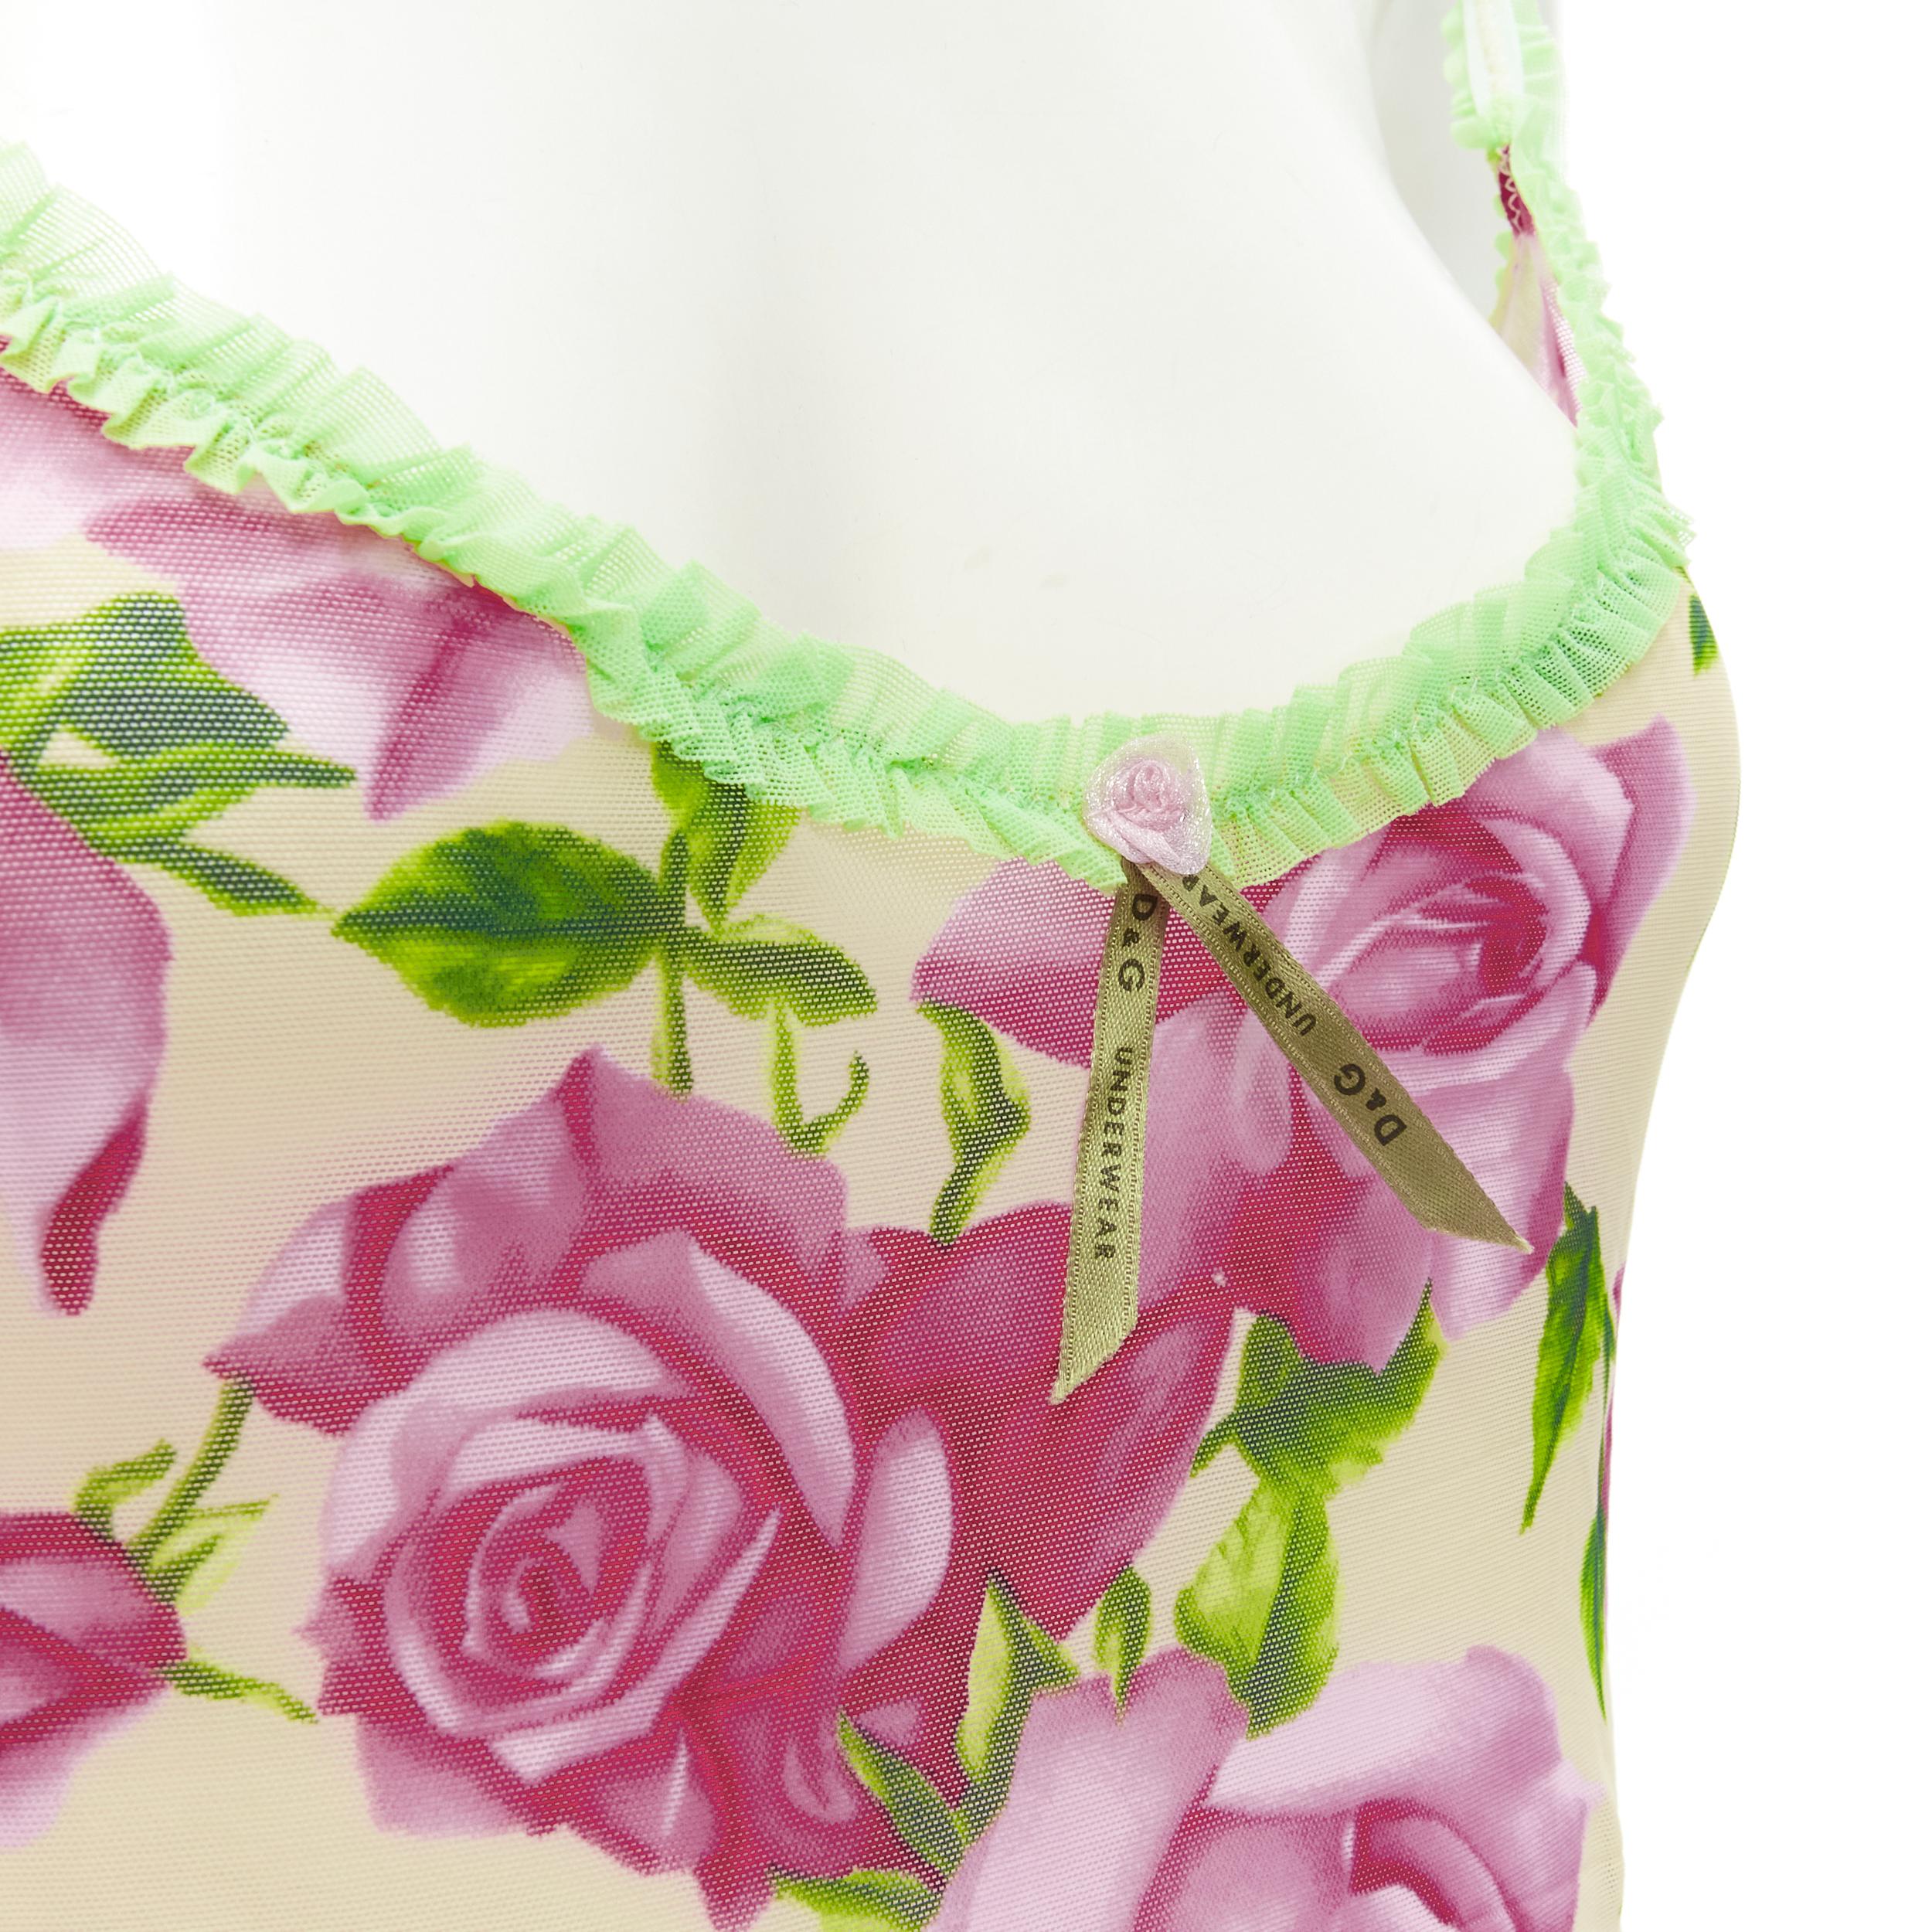 D&G DOLCE GABBANA Vintage Y2K pink rose green ruffle trim cami tank top XS 
Reference: ANWU/A00605 
Brand: D&G 
Material: Feels like polyester 
Color: Pink 
Pattern: Floral 
Extra Detail: Adjustable shoulder strap. Green tulle ruffle shoulder strap.